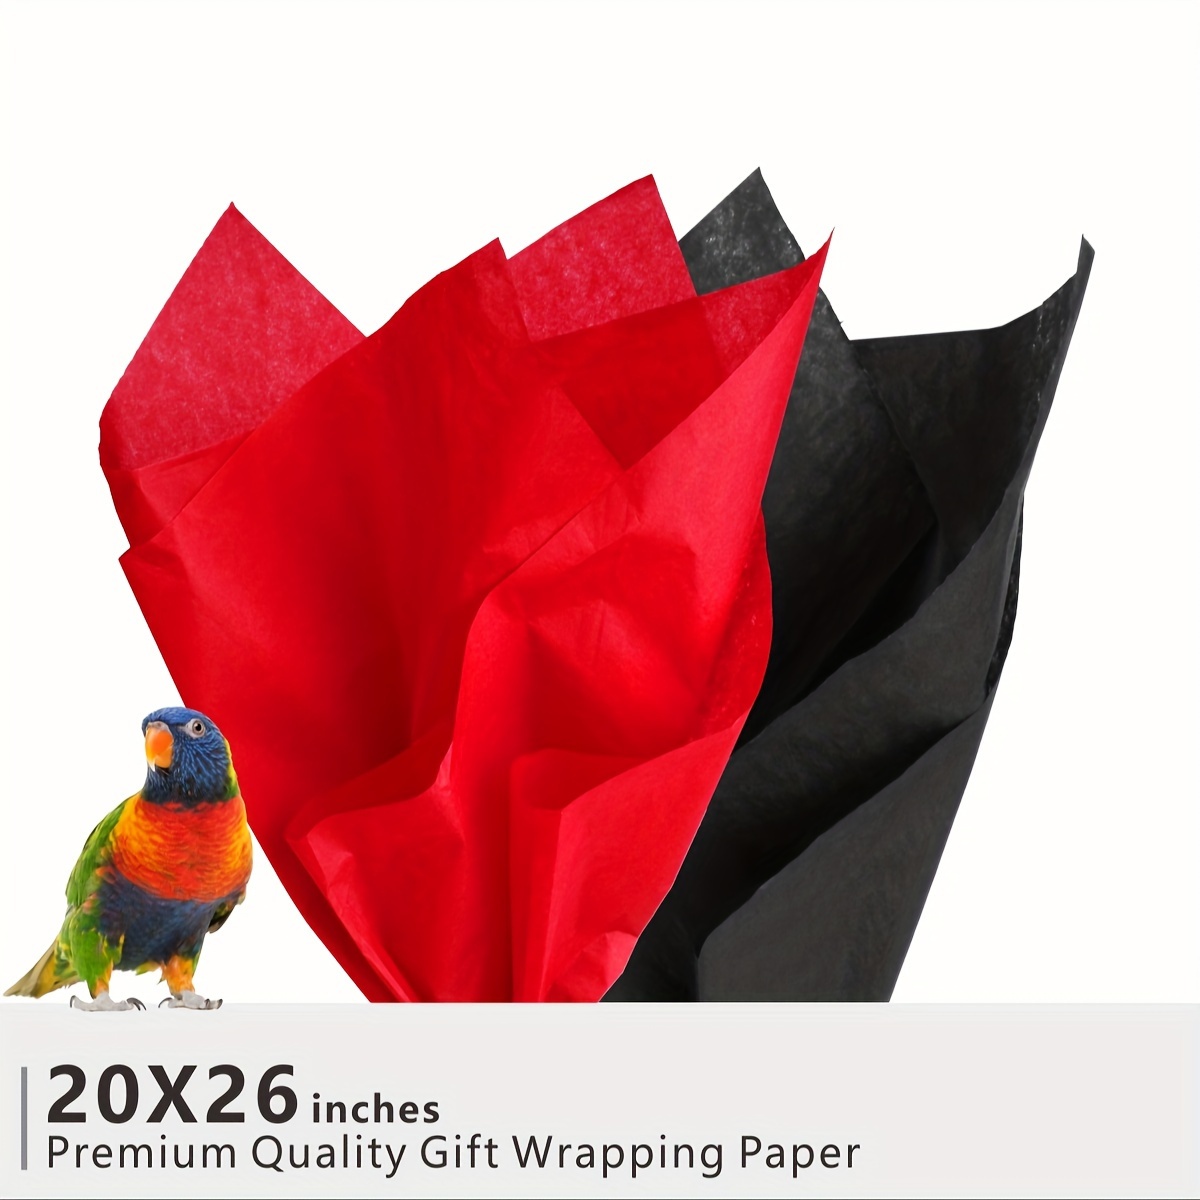 Flower Makeup Point Solid Color Mg Tissue Paper Red Bouquet Wrapping Paper  Material Lining Paper Flowers Diy Flower Shop Floral Materials, Wrapping  Paper, Tissue Paper, Flower Bouquet Supplies, Gift Wrapping Paper, Flower